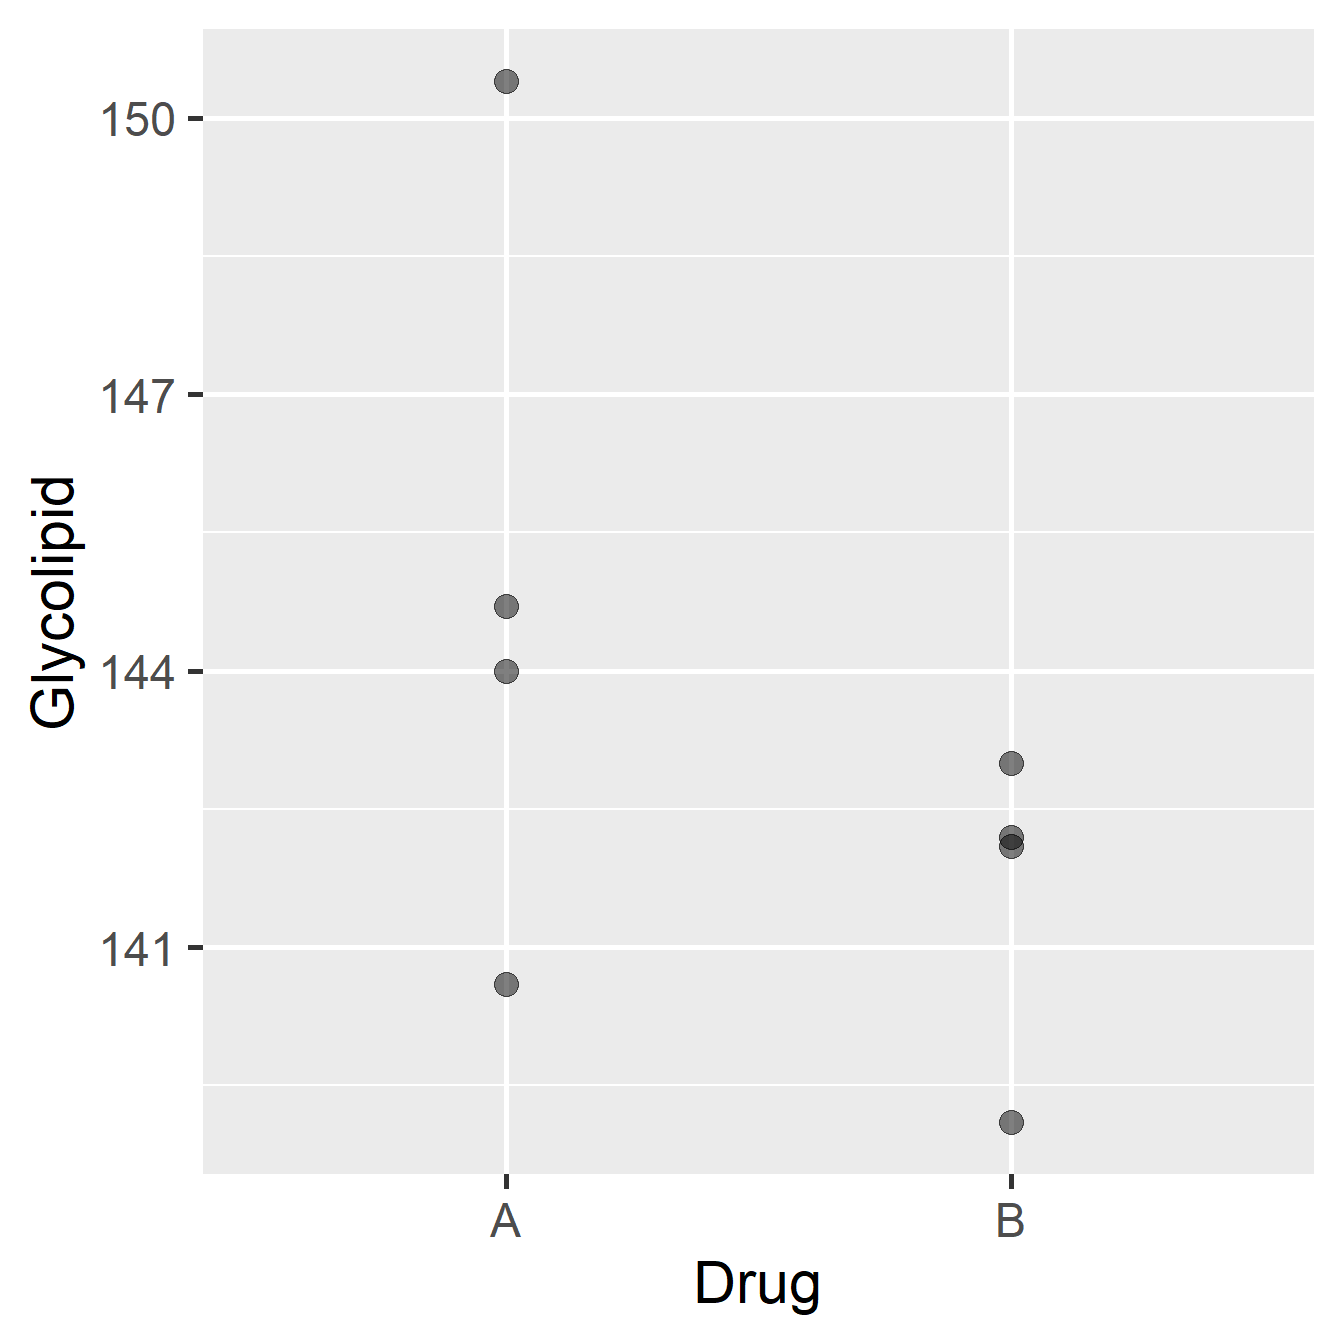 Data from glycolipid study, ignoring paired design.